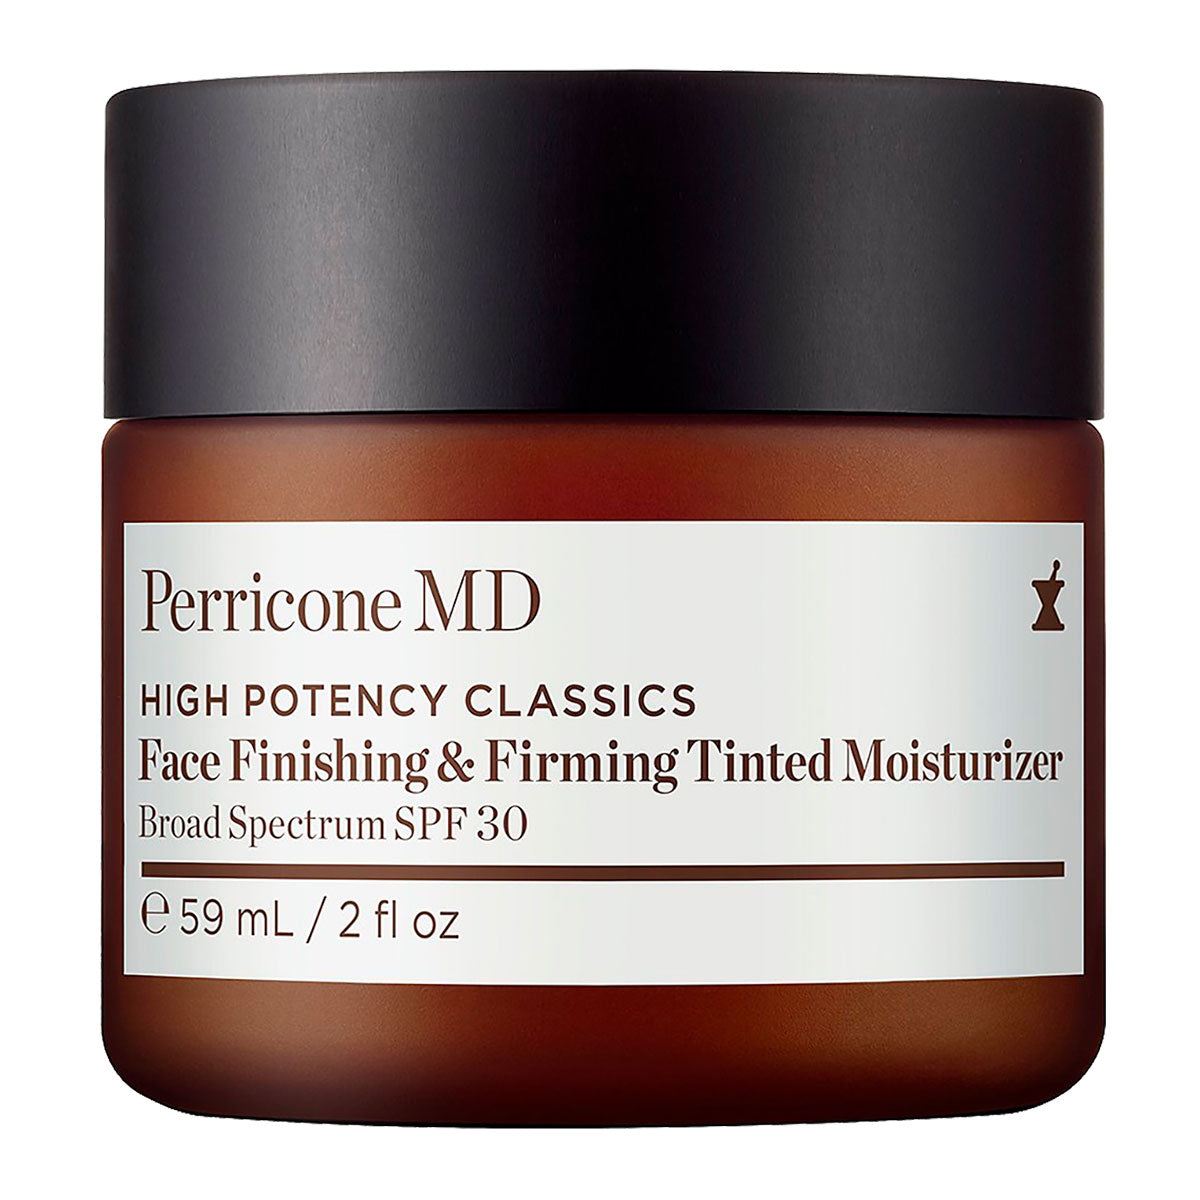 Perricone MD High Face Finishing & Firming Tinted Moisturizer Mineral Sunscreen SPF 30 59 ml